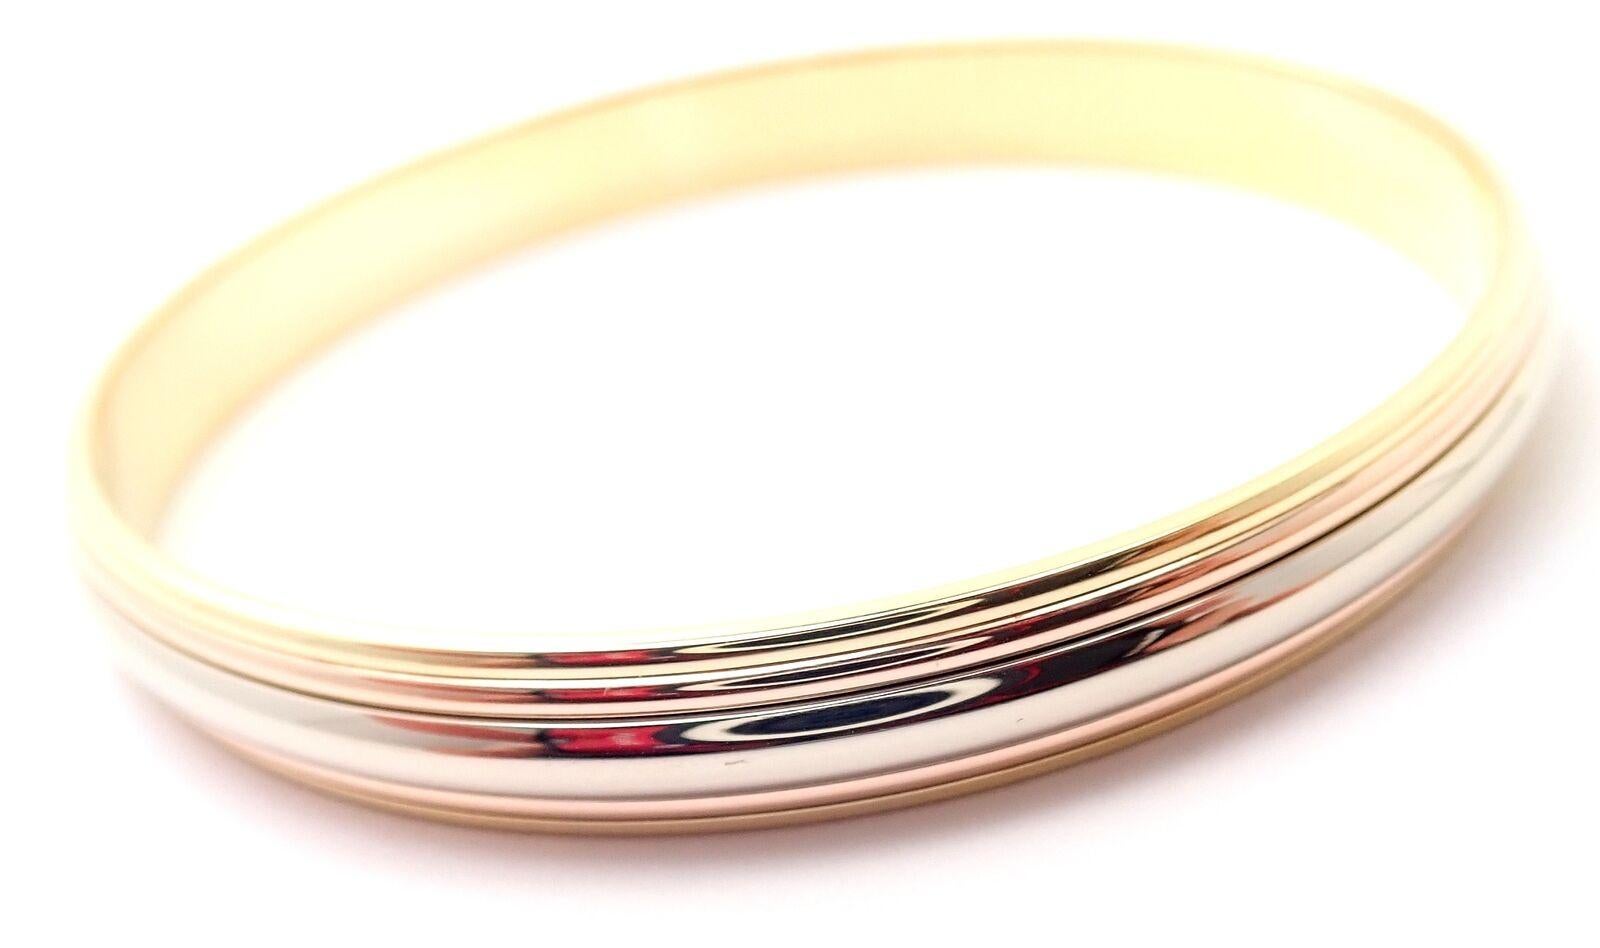 18k Tri-Colored Gold (Yellow, White, Rose) Trinity Slip-On Bangle Bracelet by Cartier. 
Details: 
Length: Size 6.5